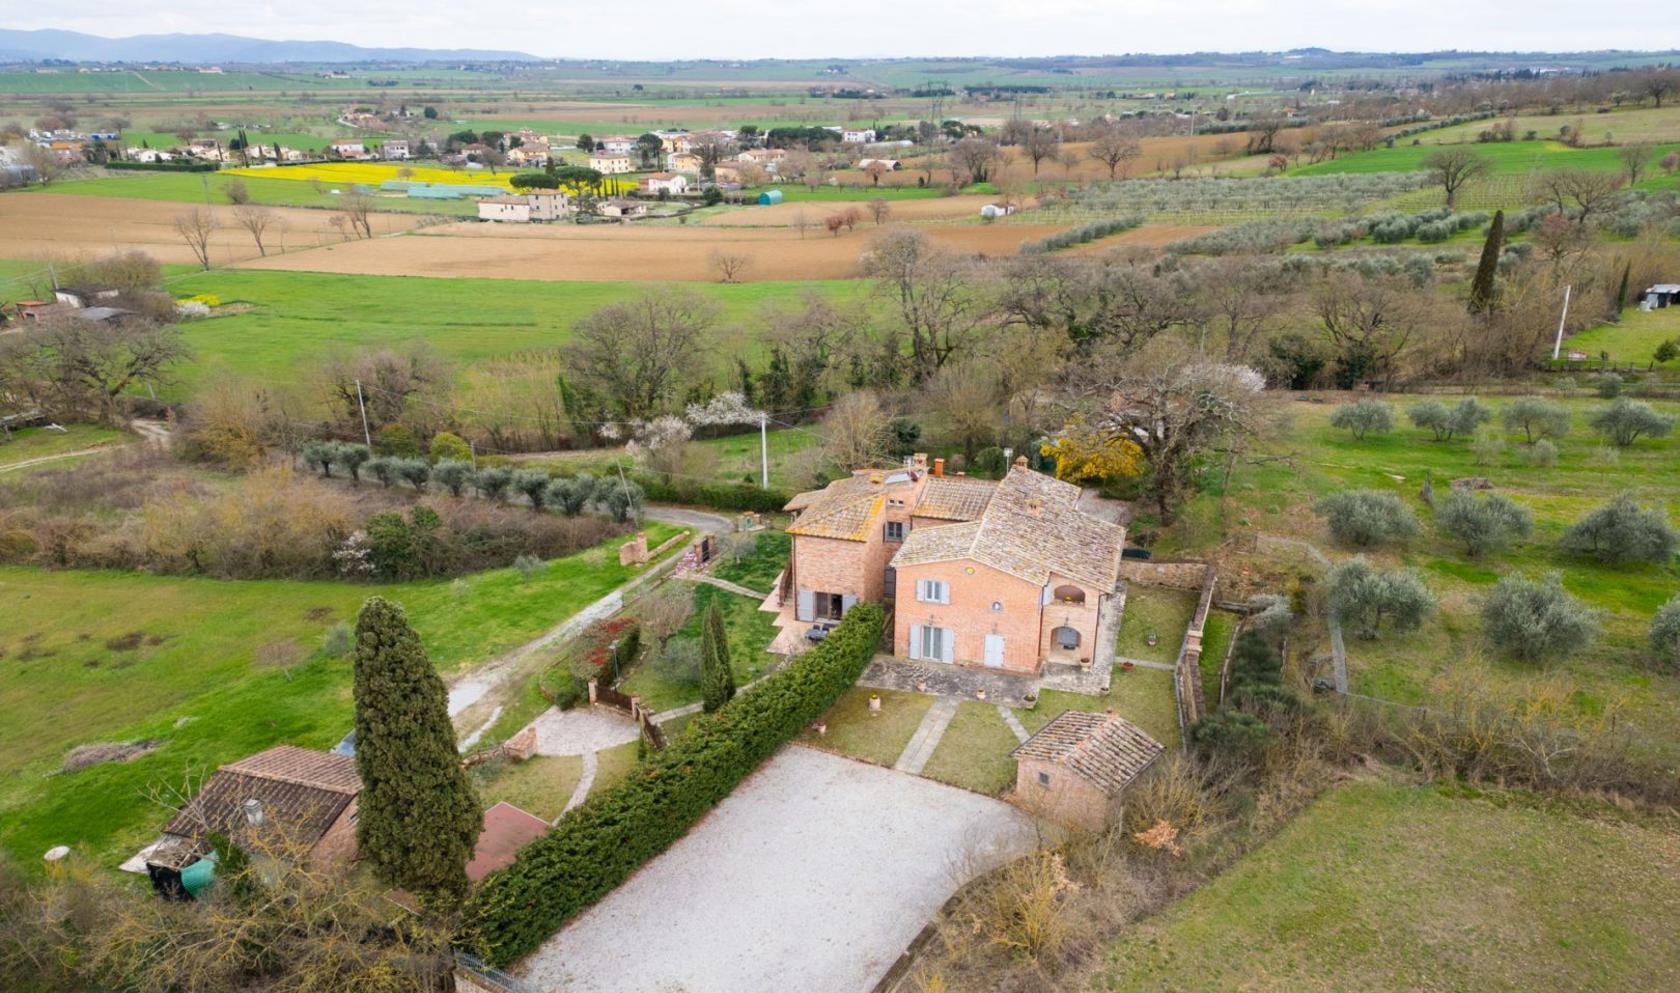 Toscana Immobiliare - Restored farmhouse with annexe, land and view of the Tuscan countryside